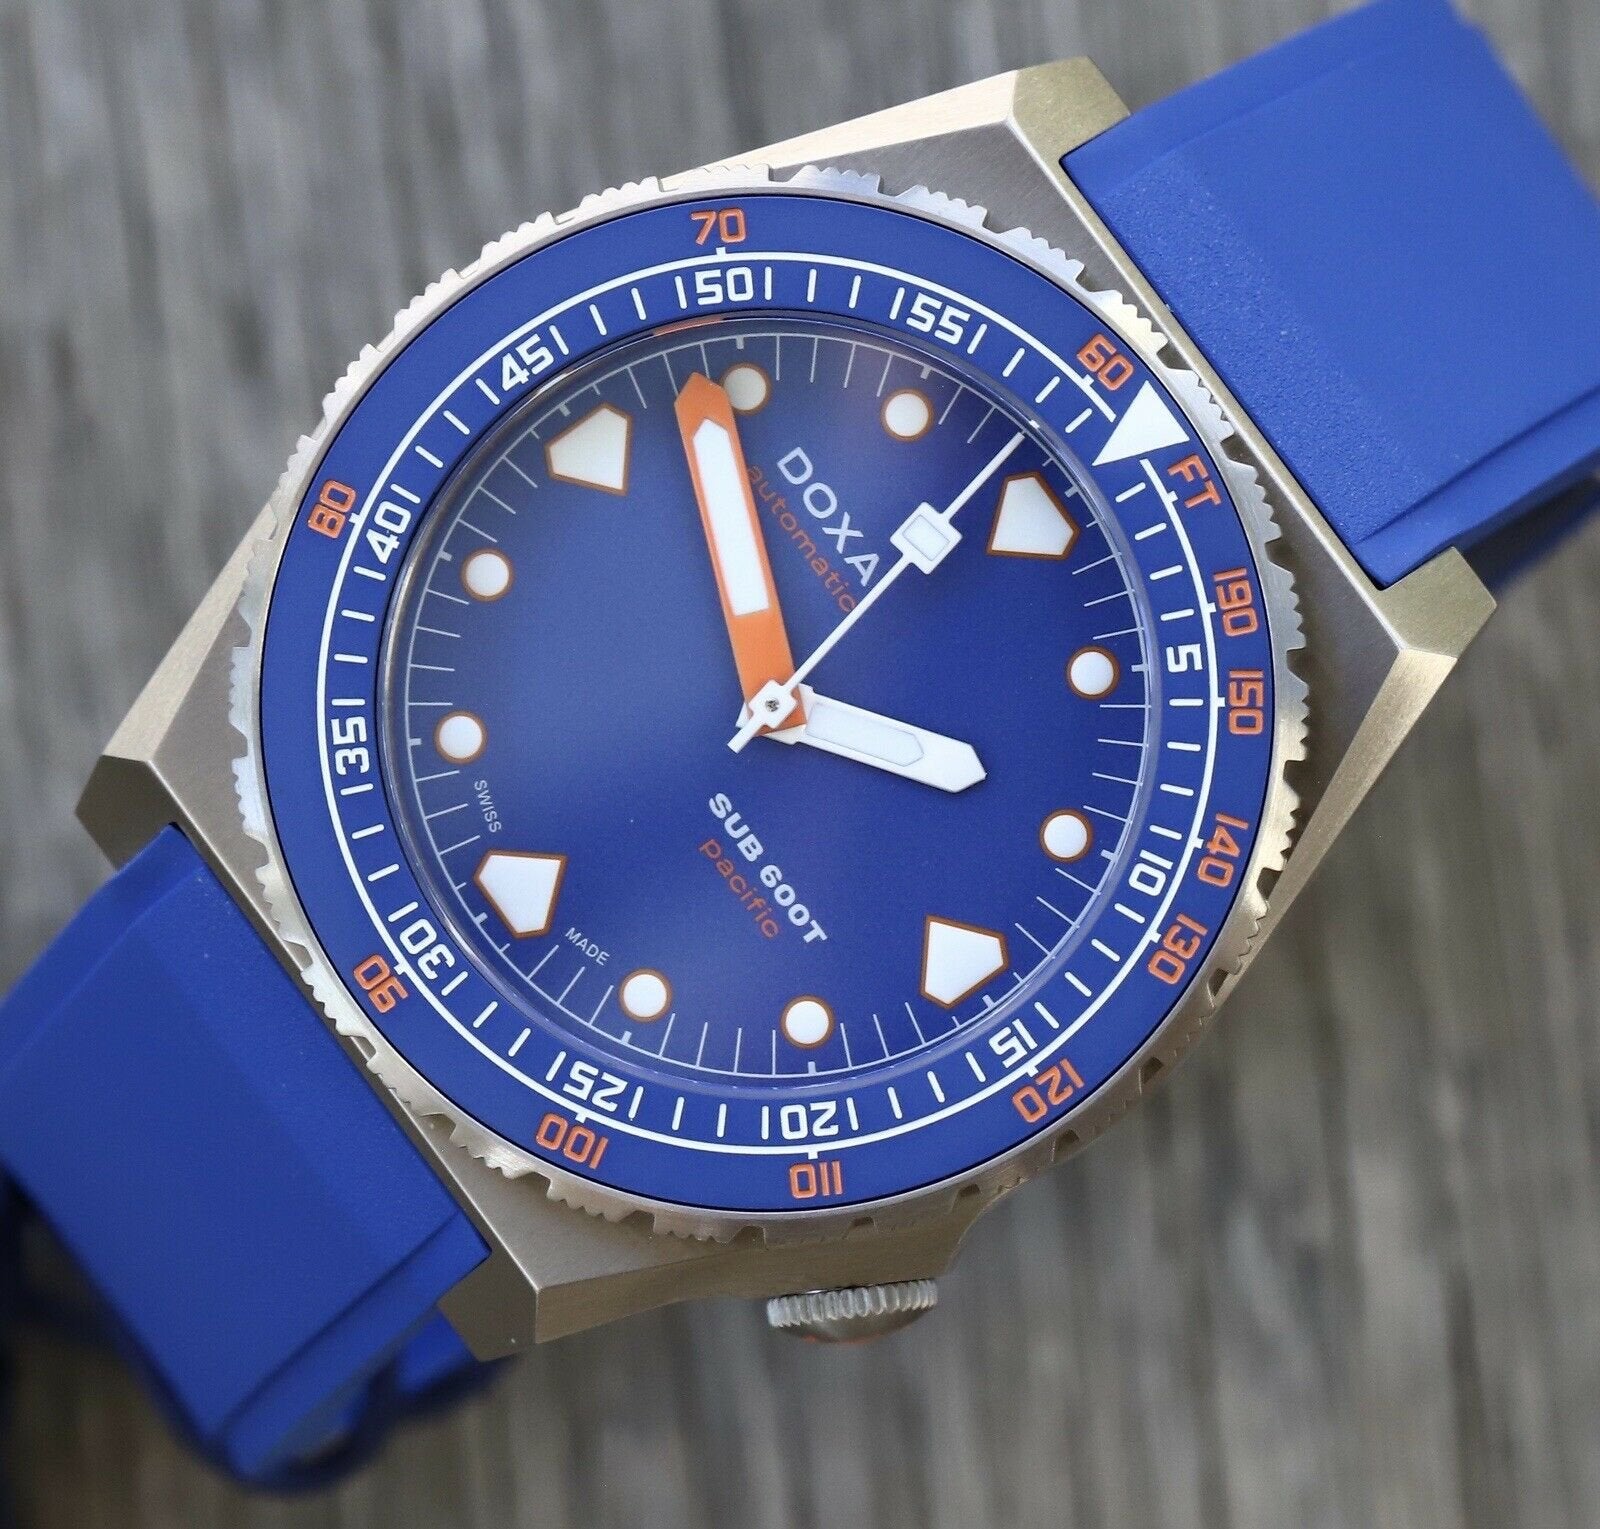 Time_26_Tide_x_Doxa_SUB_600T_E2_80_98pacific_E2_80_99_Limited_Edition_E2_80_93_Brand_New_Watch_Vault_02.jpg